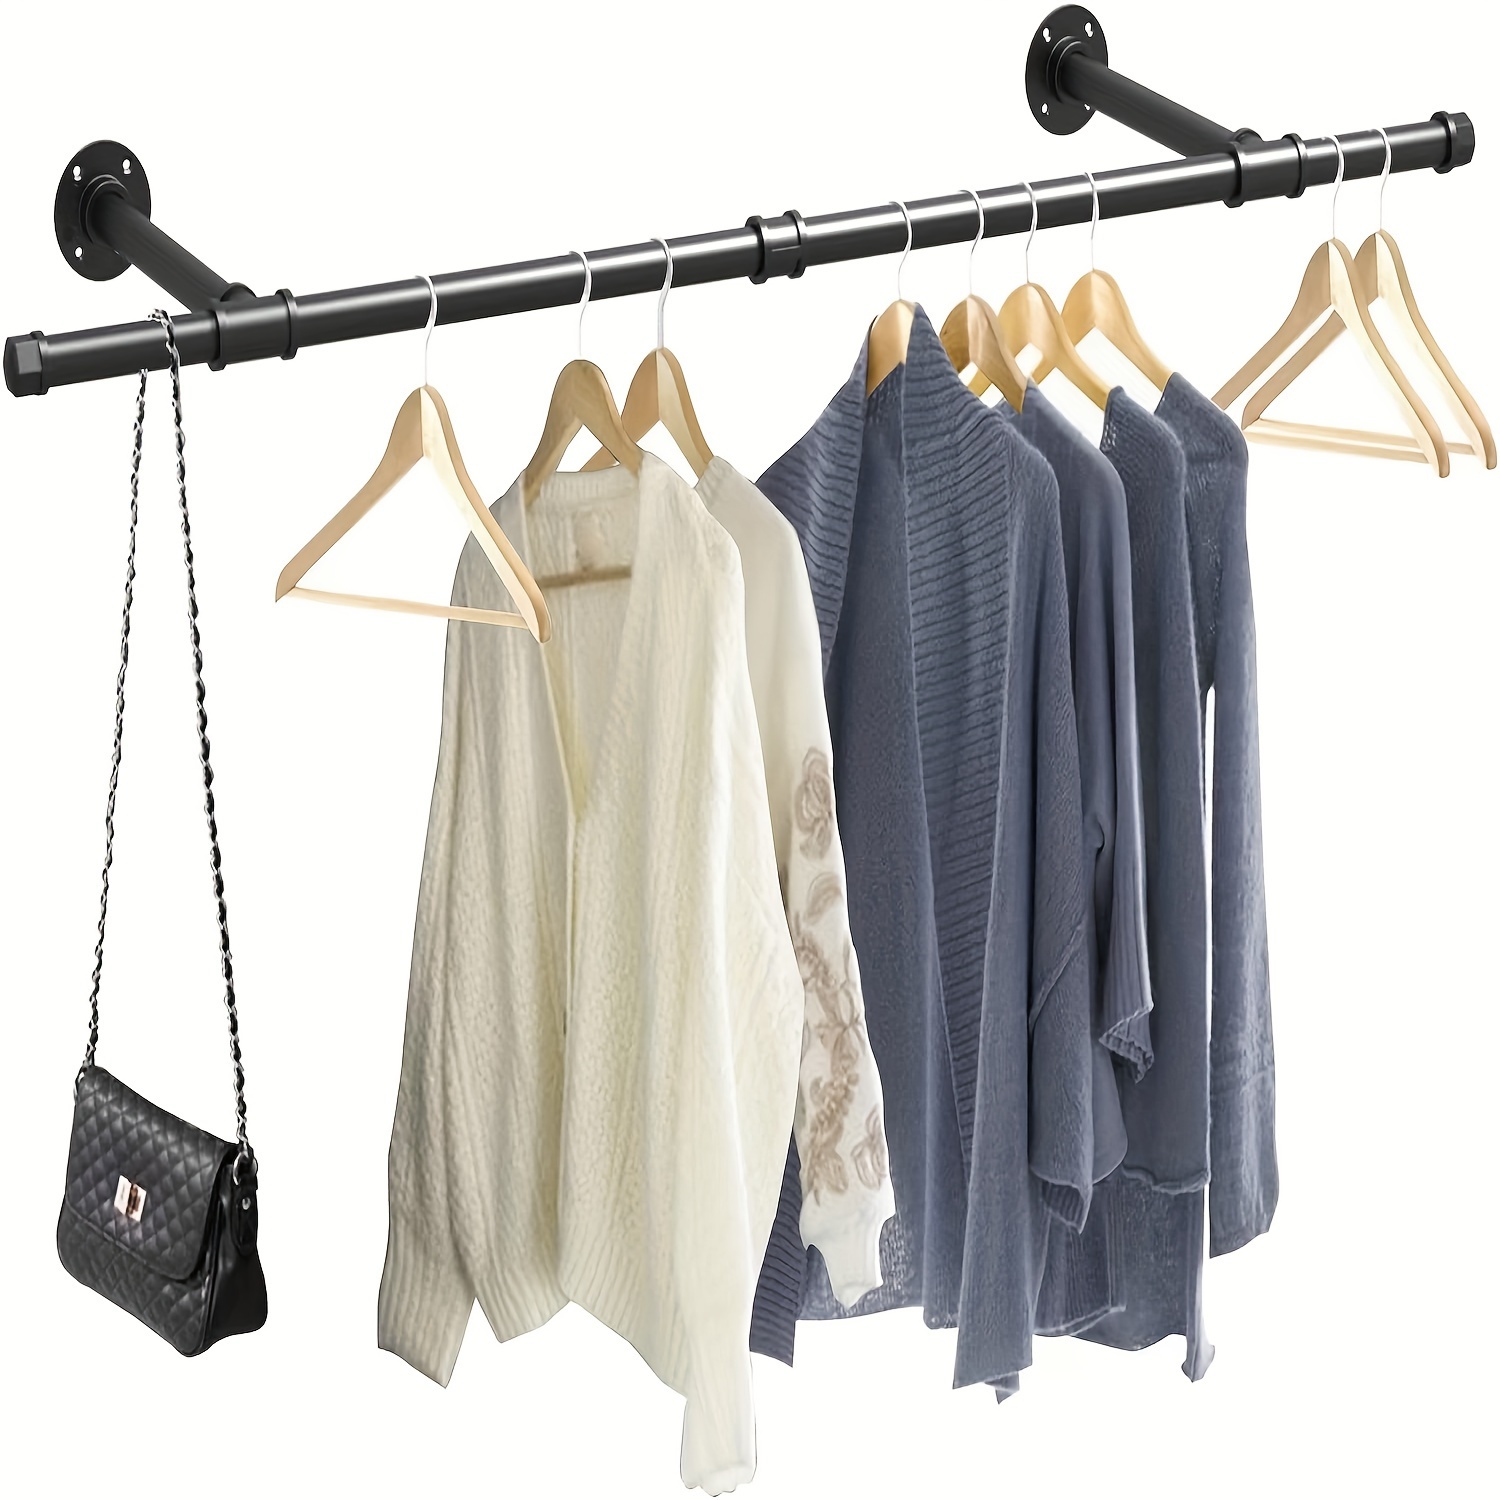 Clothes Hanger Cloth Display Rack for Retail Commercial Wall-mounted BLACK  NEW]